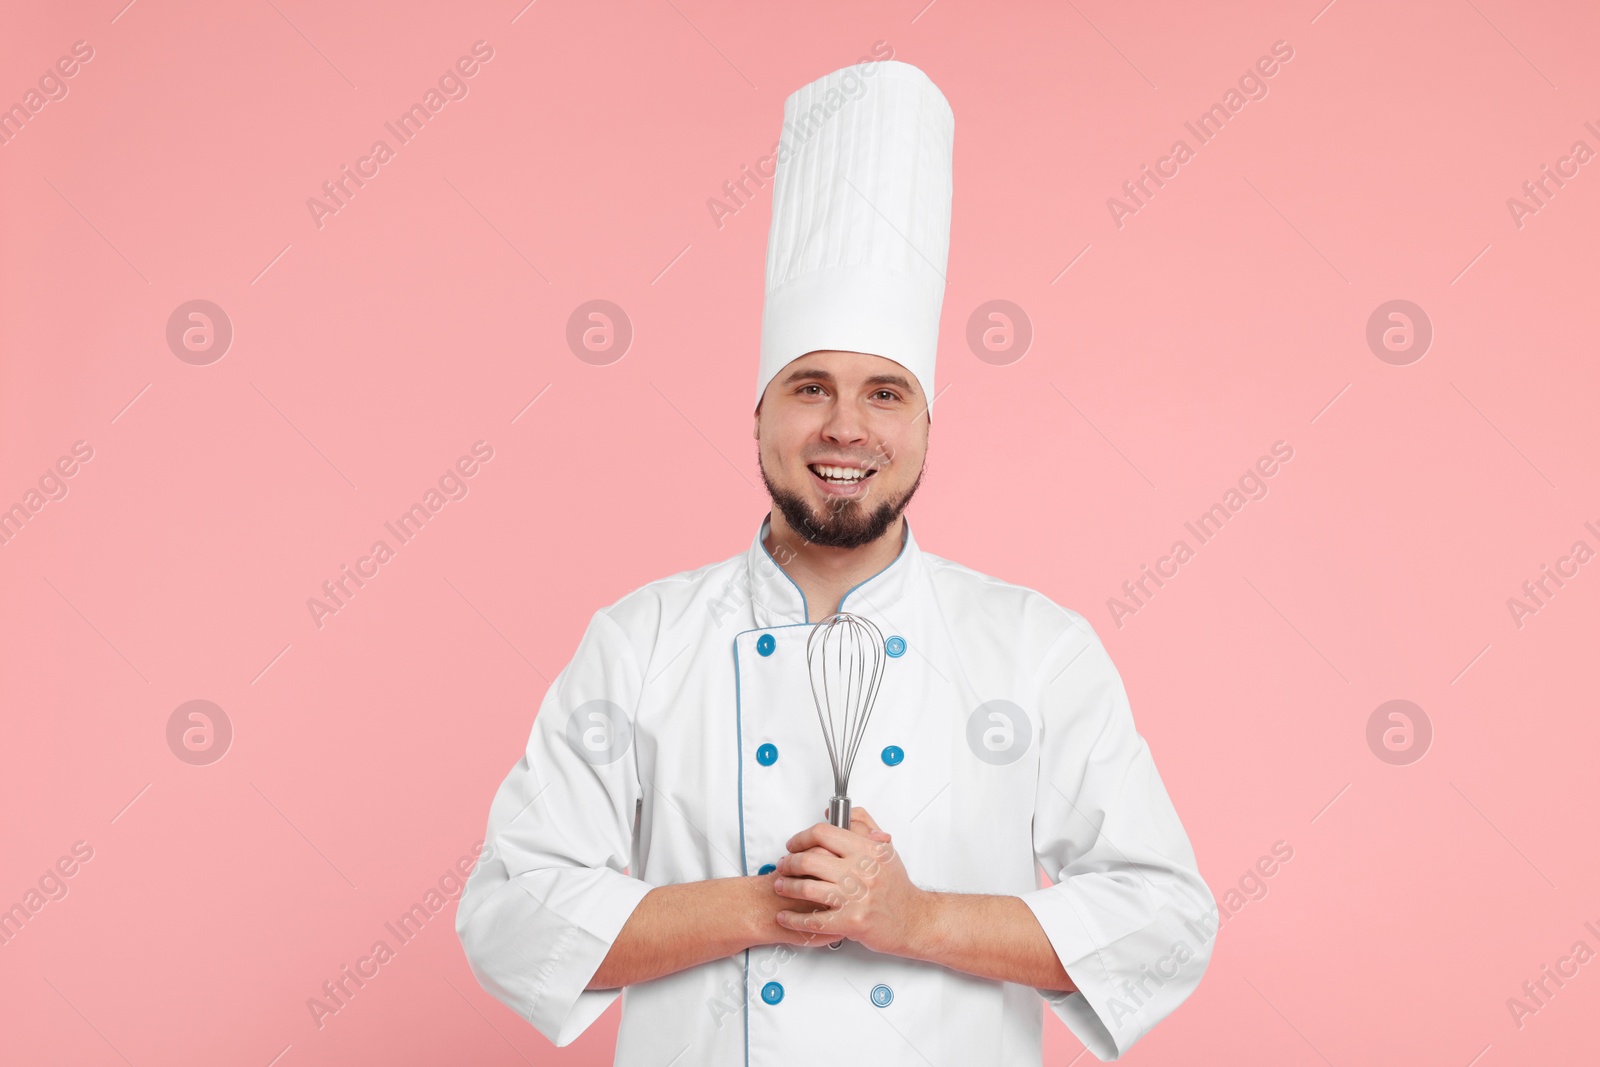 Photo of Happy professional confectioner in uniform holding whisk on pink background